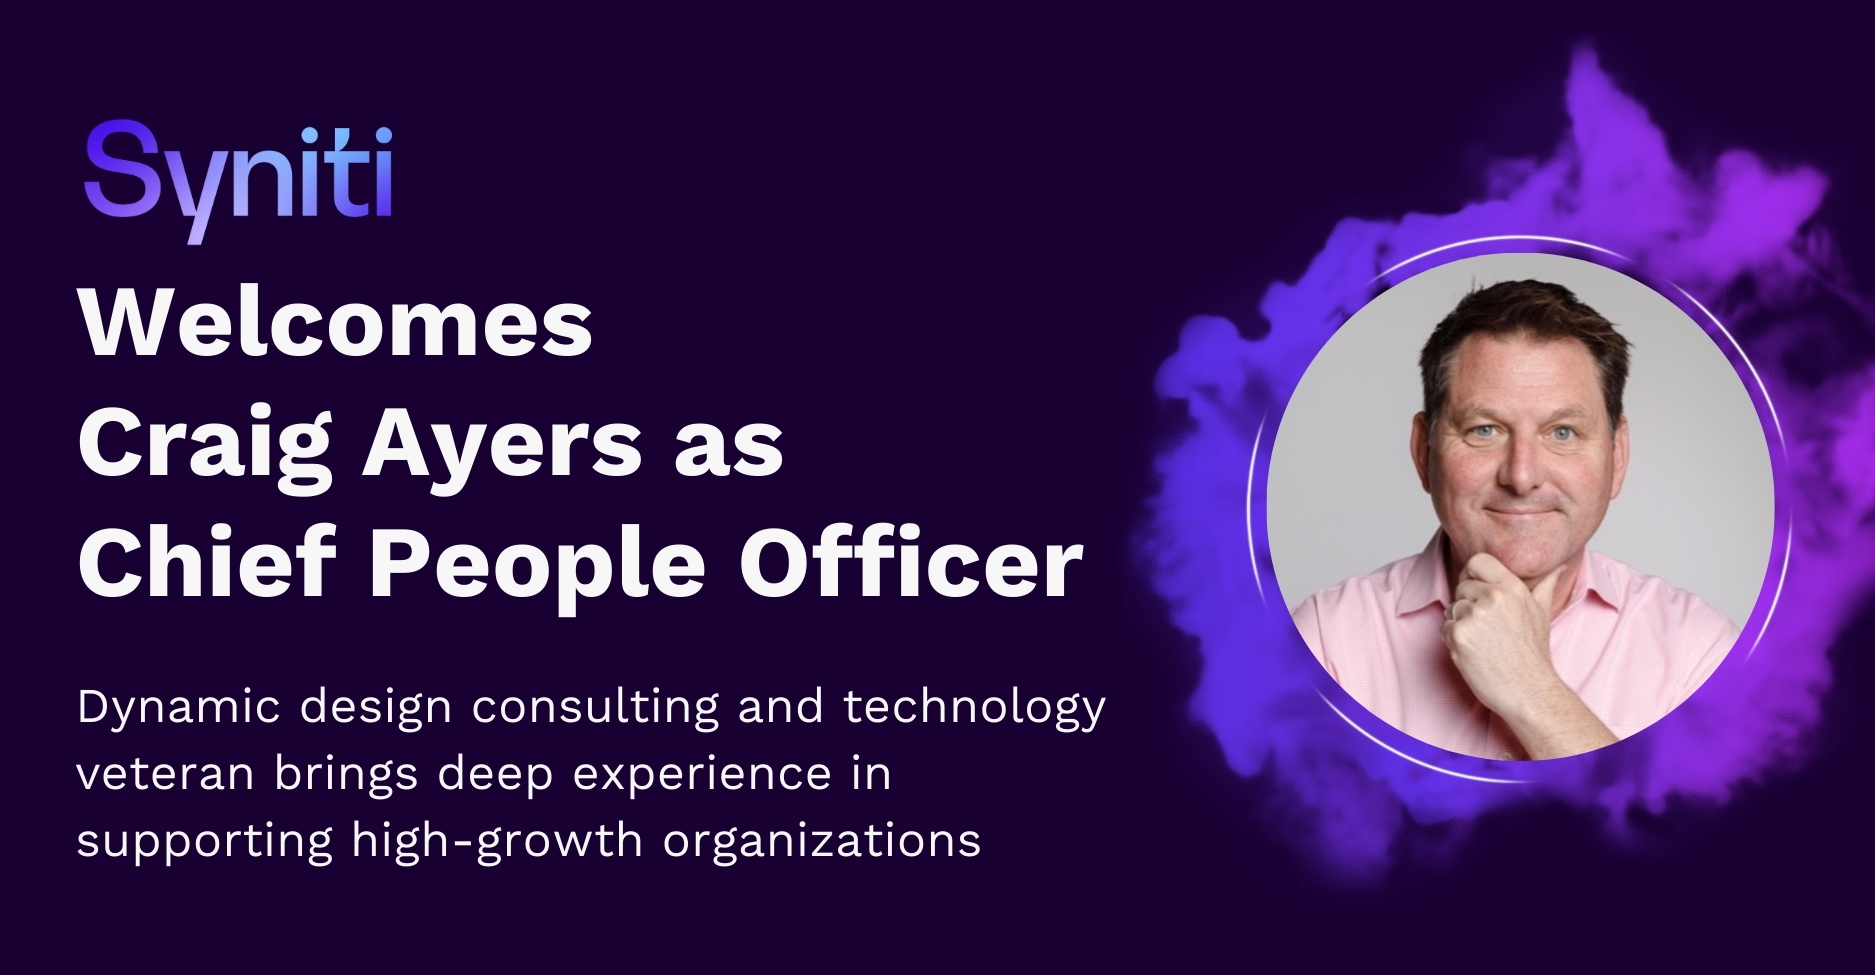 Syniti Welcomes Craig Ayers as Chief People Officer